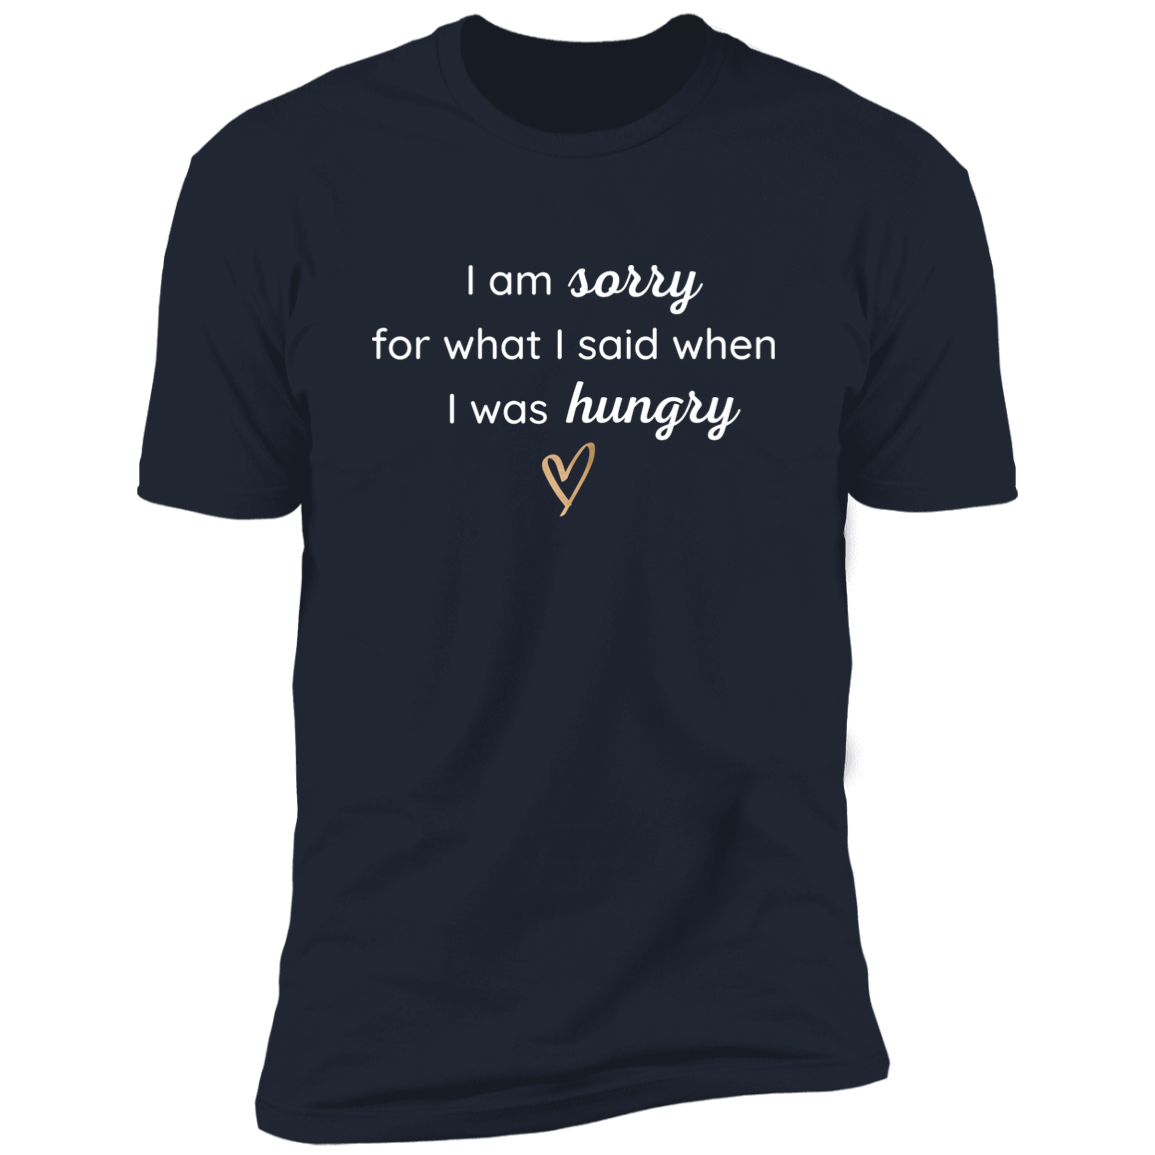 When I Was Hungry (T-Shirt)